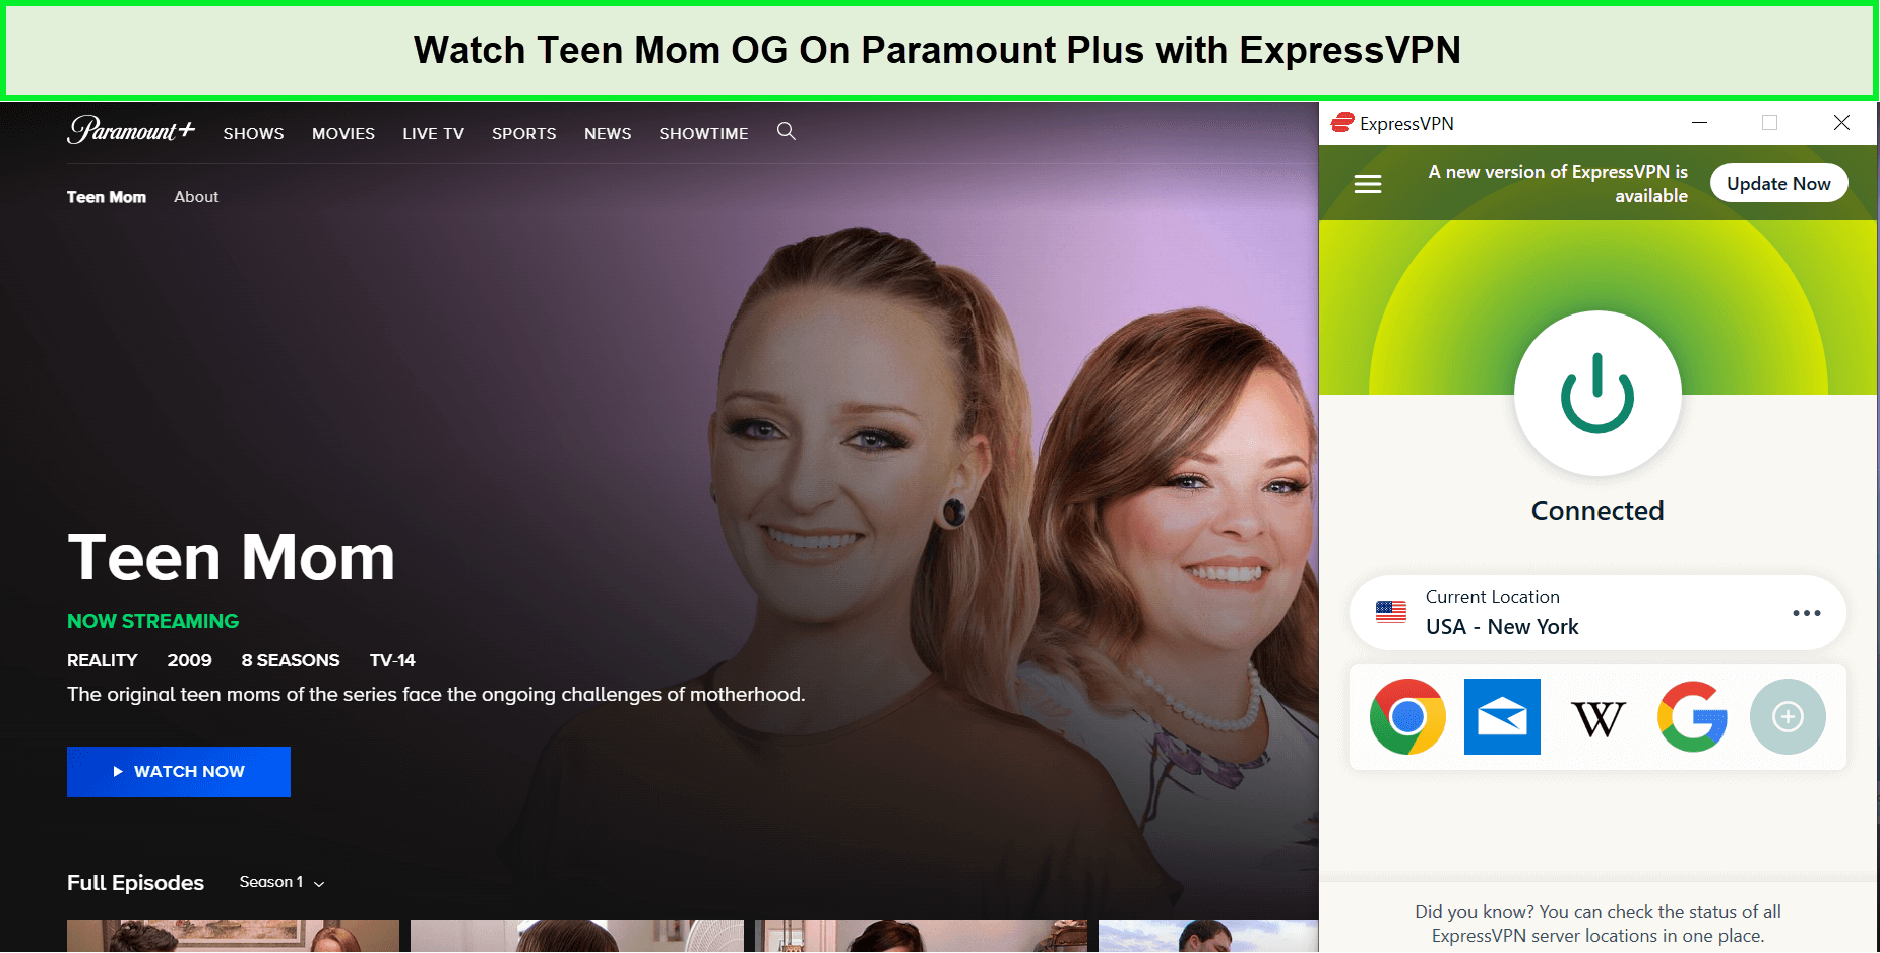 Watch-Teen-Mom-OG-Season-9-in-Singapore-On-Paramount-Plus-with-ExpressVPN